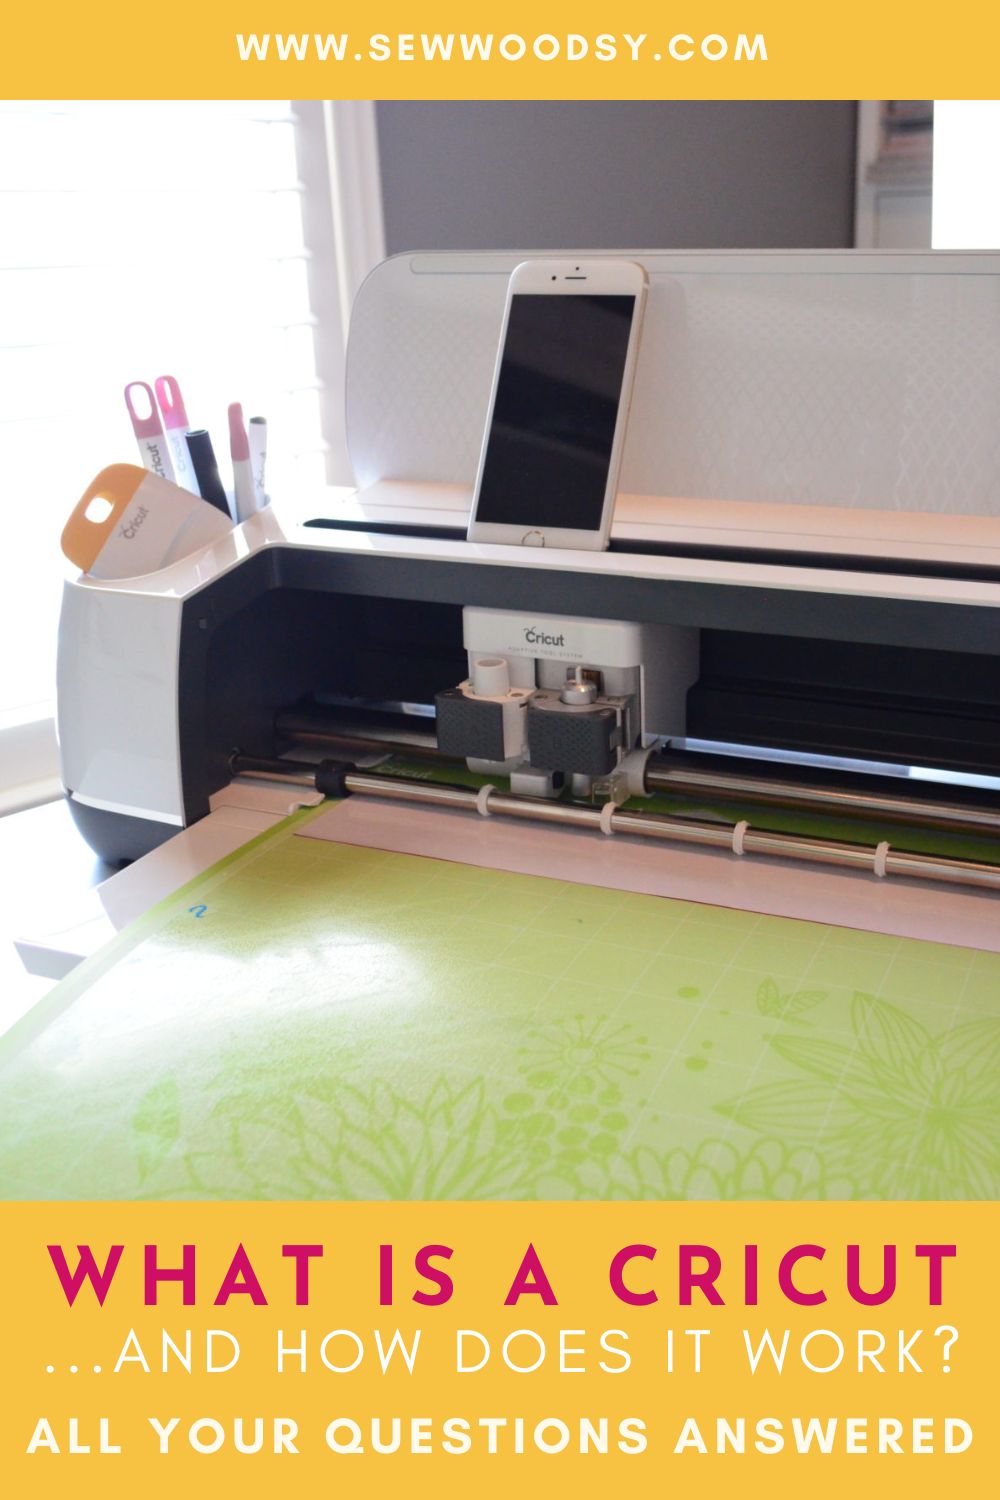 White Cricut machine with a green mat and iphone resting on top with text on the bottom of image.